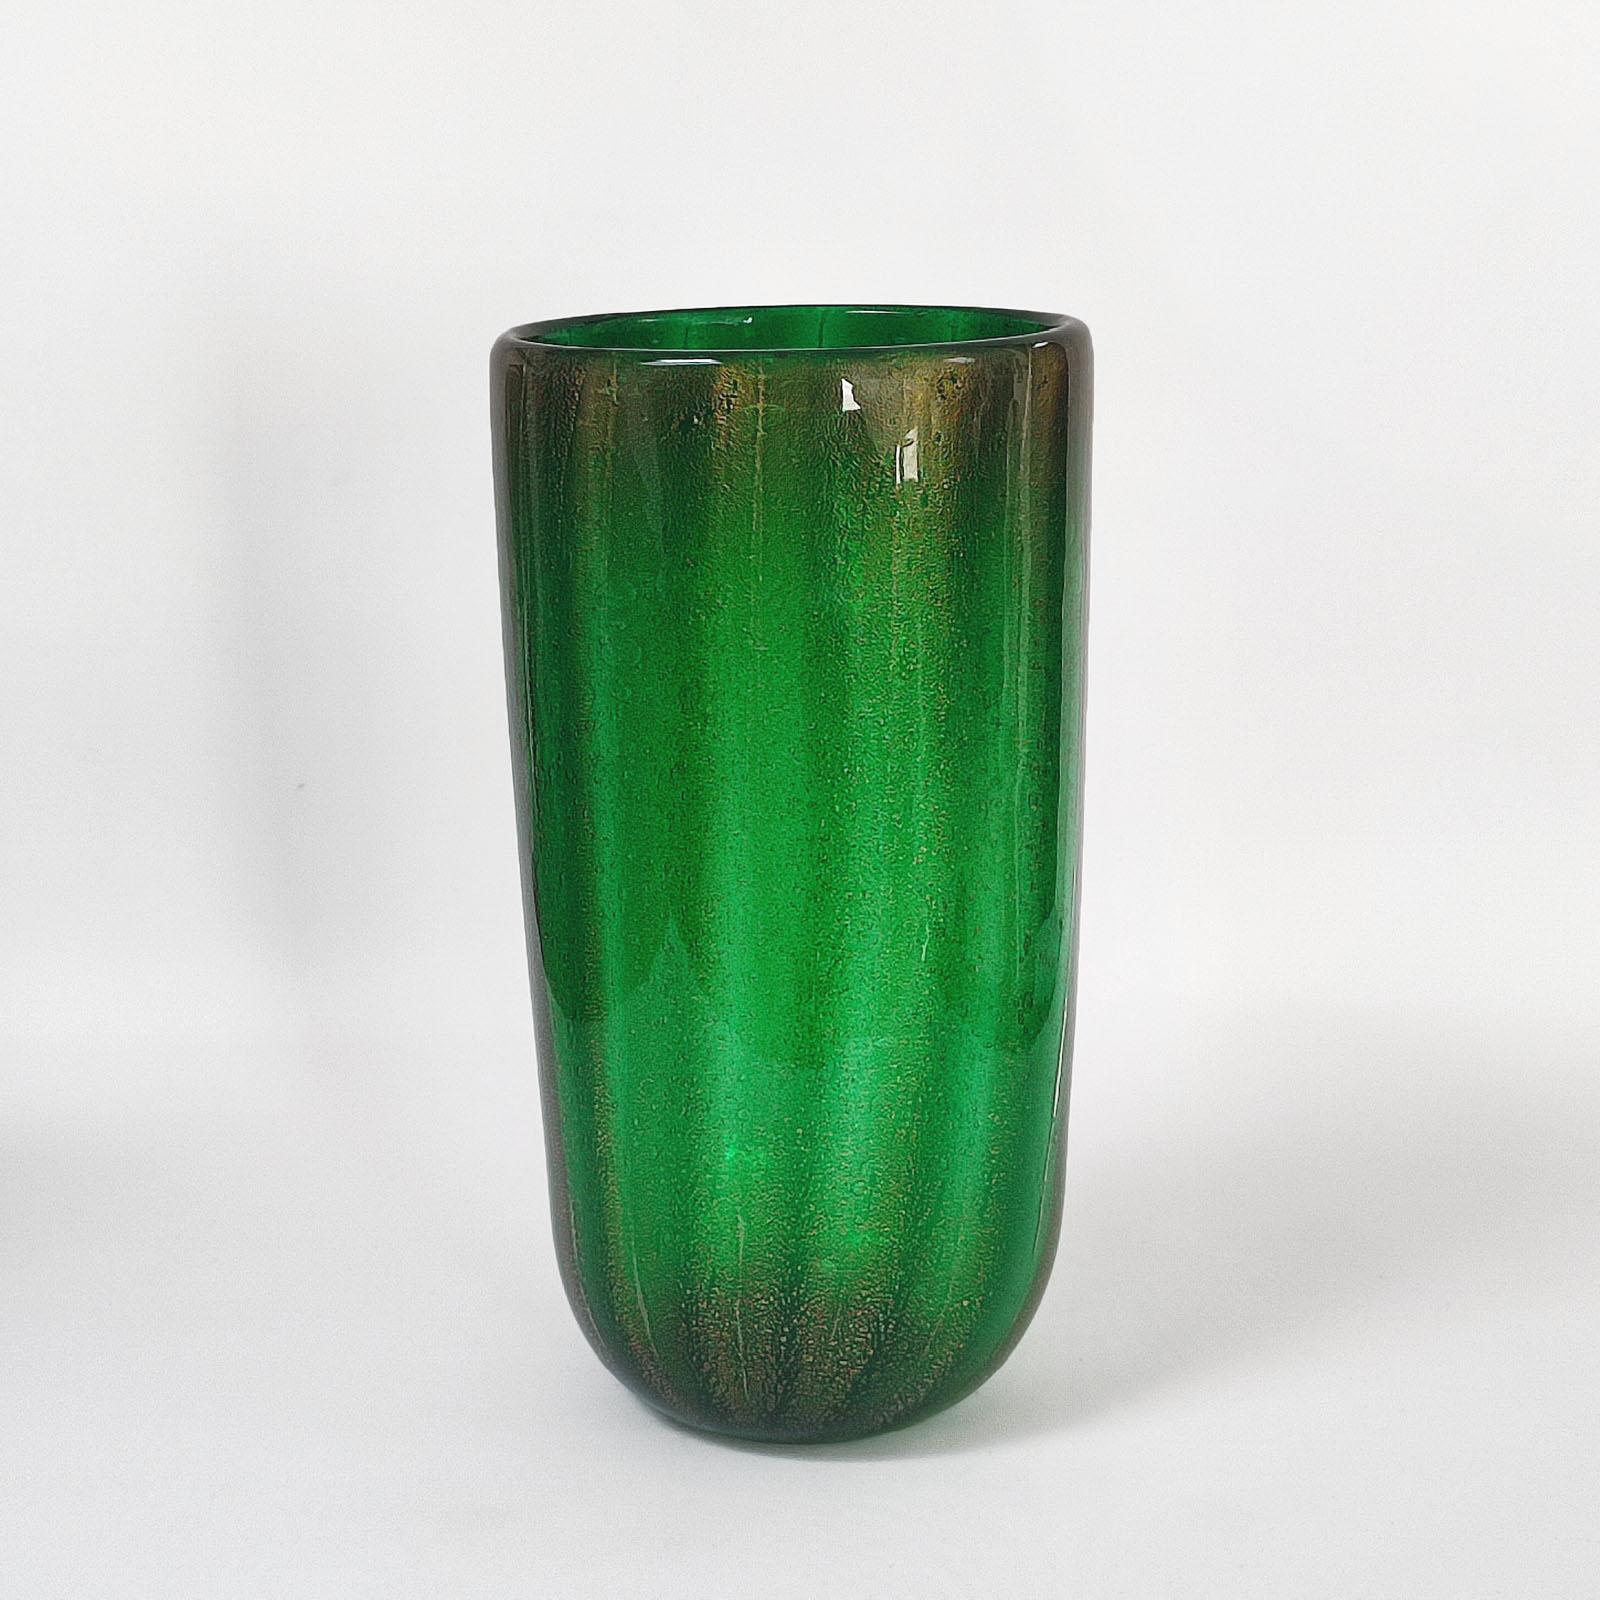 Murano Sommerso A Bollicine Vase, designed by Carlo Scarpa for Venini &C circa 1936
Carlo Scarpa, Sommerso vase featuring ribbed internal glass layer with bubbles and outer crystal layer with gold leaf.
Three line etched  signature 'venini murano